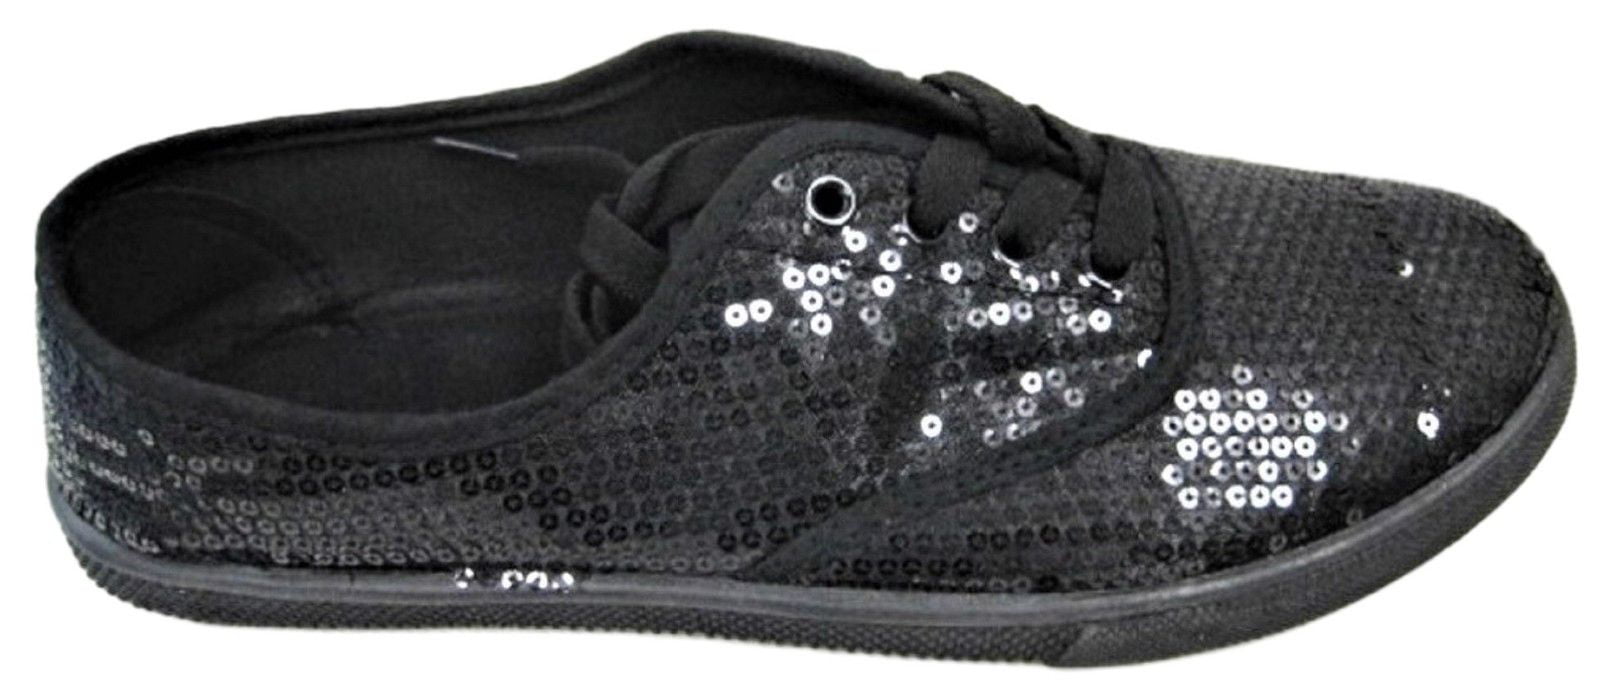 tennis shoes with sparkle